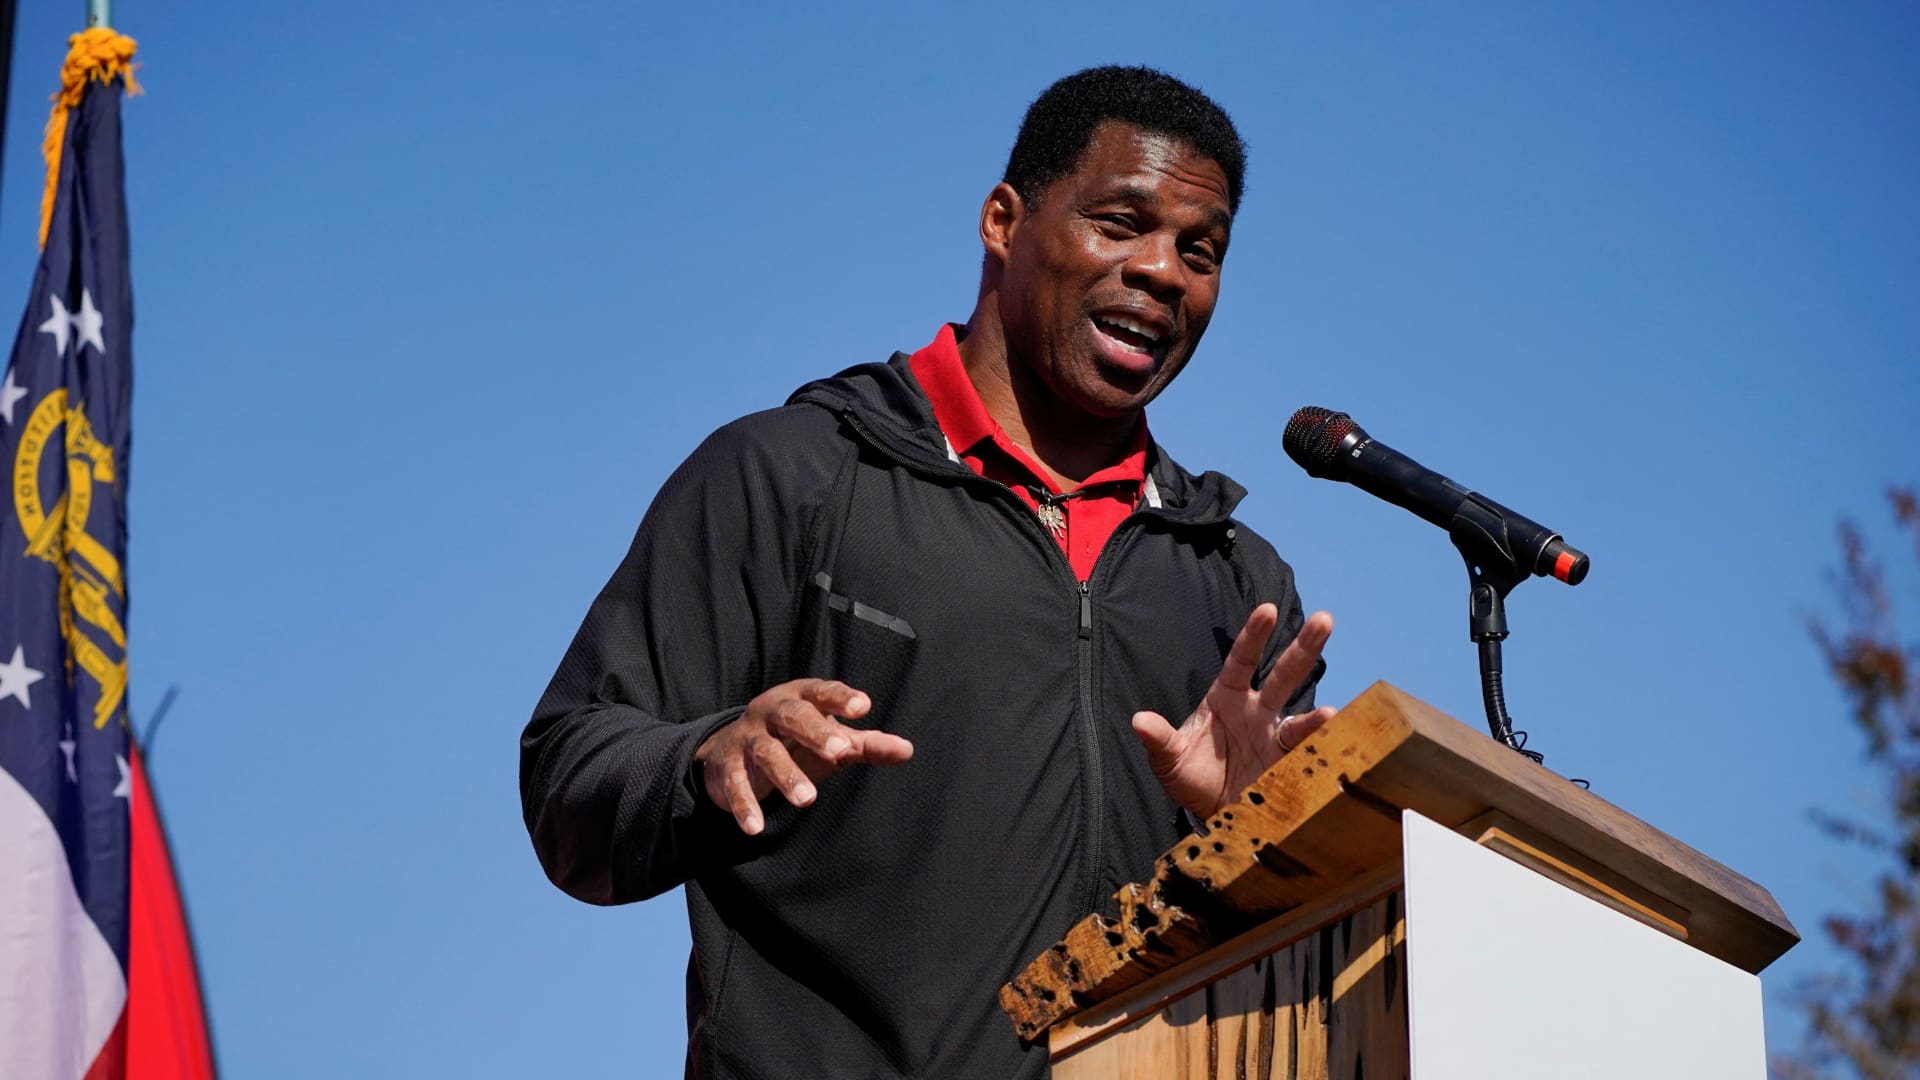 U.S. Senate candidate and former football player Herschel Walker speaks at the University of Georgia during his campaign rally in Americus, Georgia, October 21, 2022.